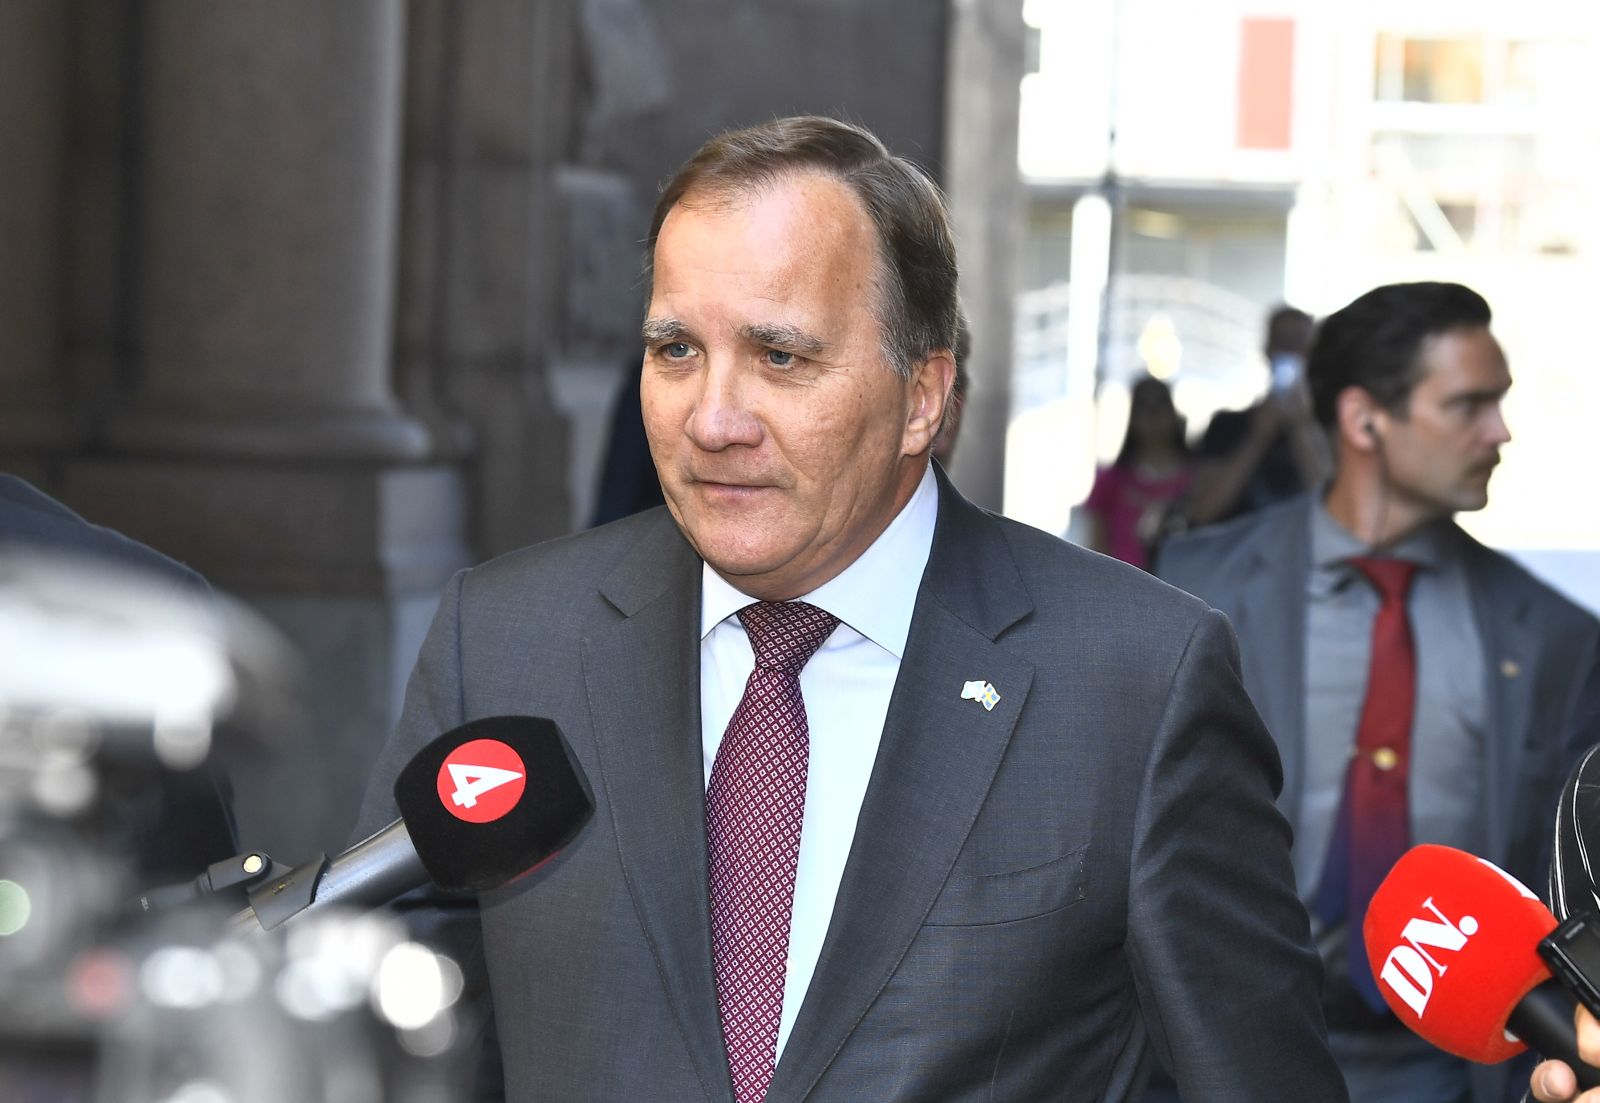 epa09310196 Sweden's acting Prime Minister Stefan Lofven (C) arrives for a round of consultations at the Swedish parliament in Stockholm, Sweden, 29 June 2021. The Prime Minister and other ministers were dismissed by the Speaker of the Riksdag on 28 June. However they retained their positions until a new government takes office. The Speaker will start consultations with representatives of the party groups with the aim of proposing a new Prime Minister to the Riksdag.  EPA/CLAUDIO BRESCIANI  SWEDEN OUT